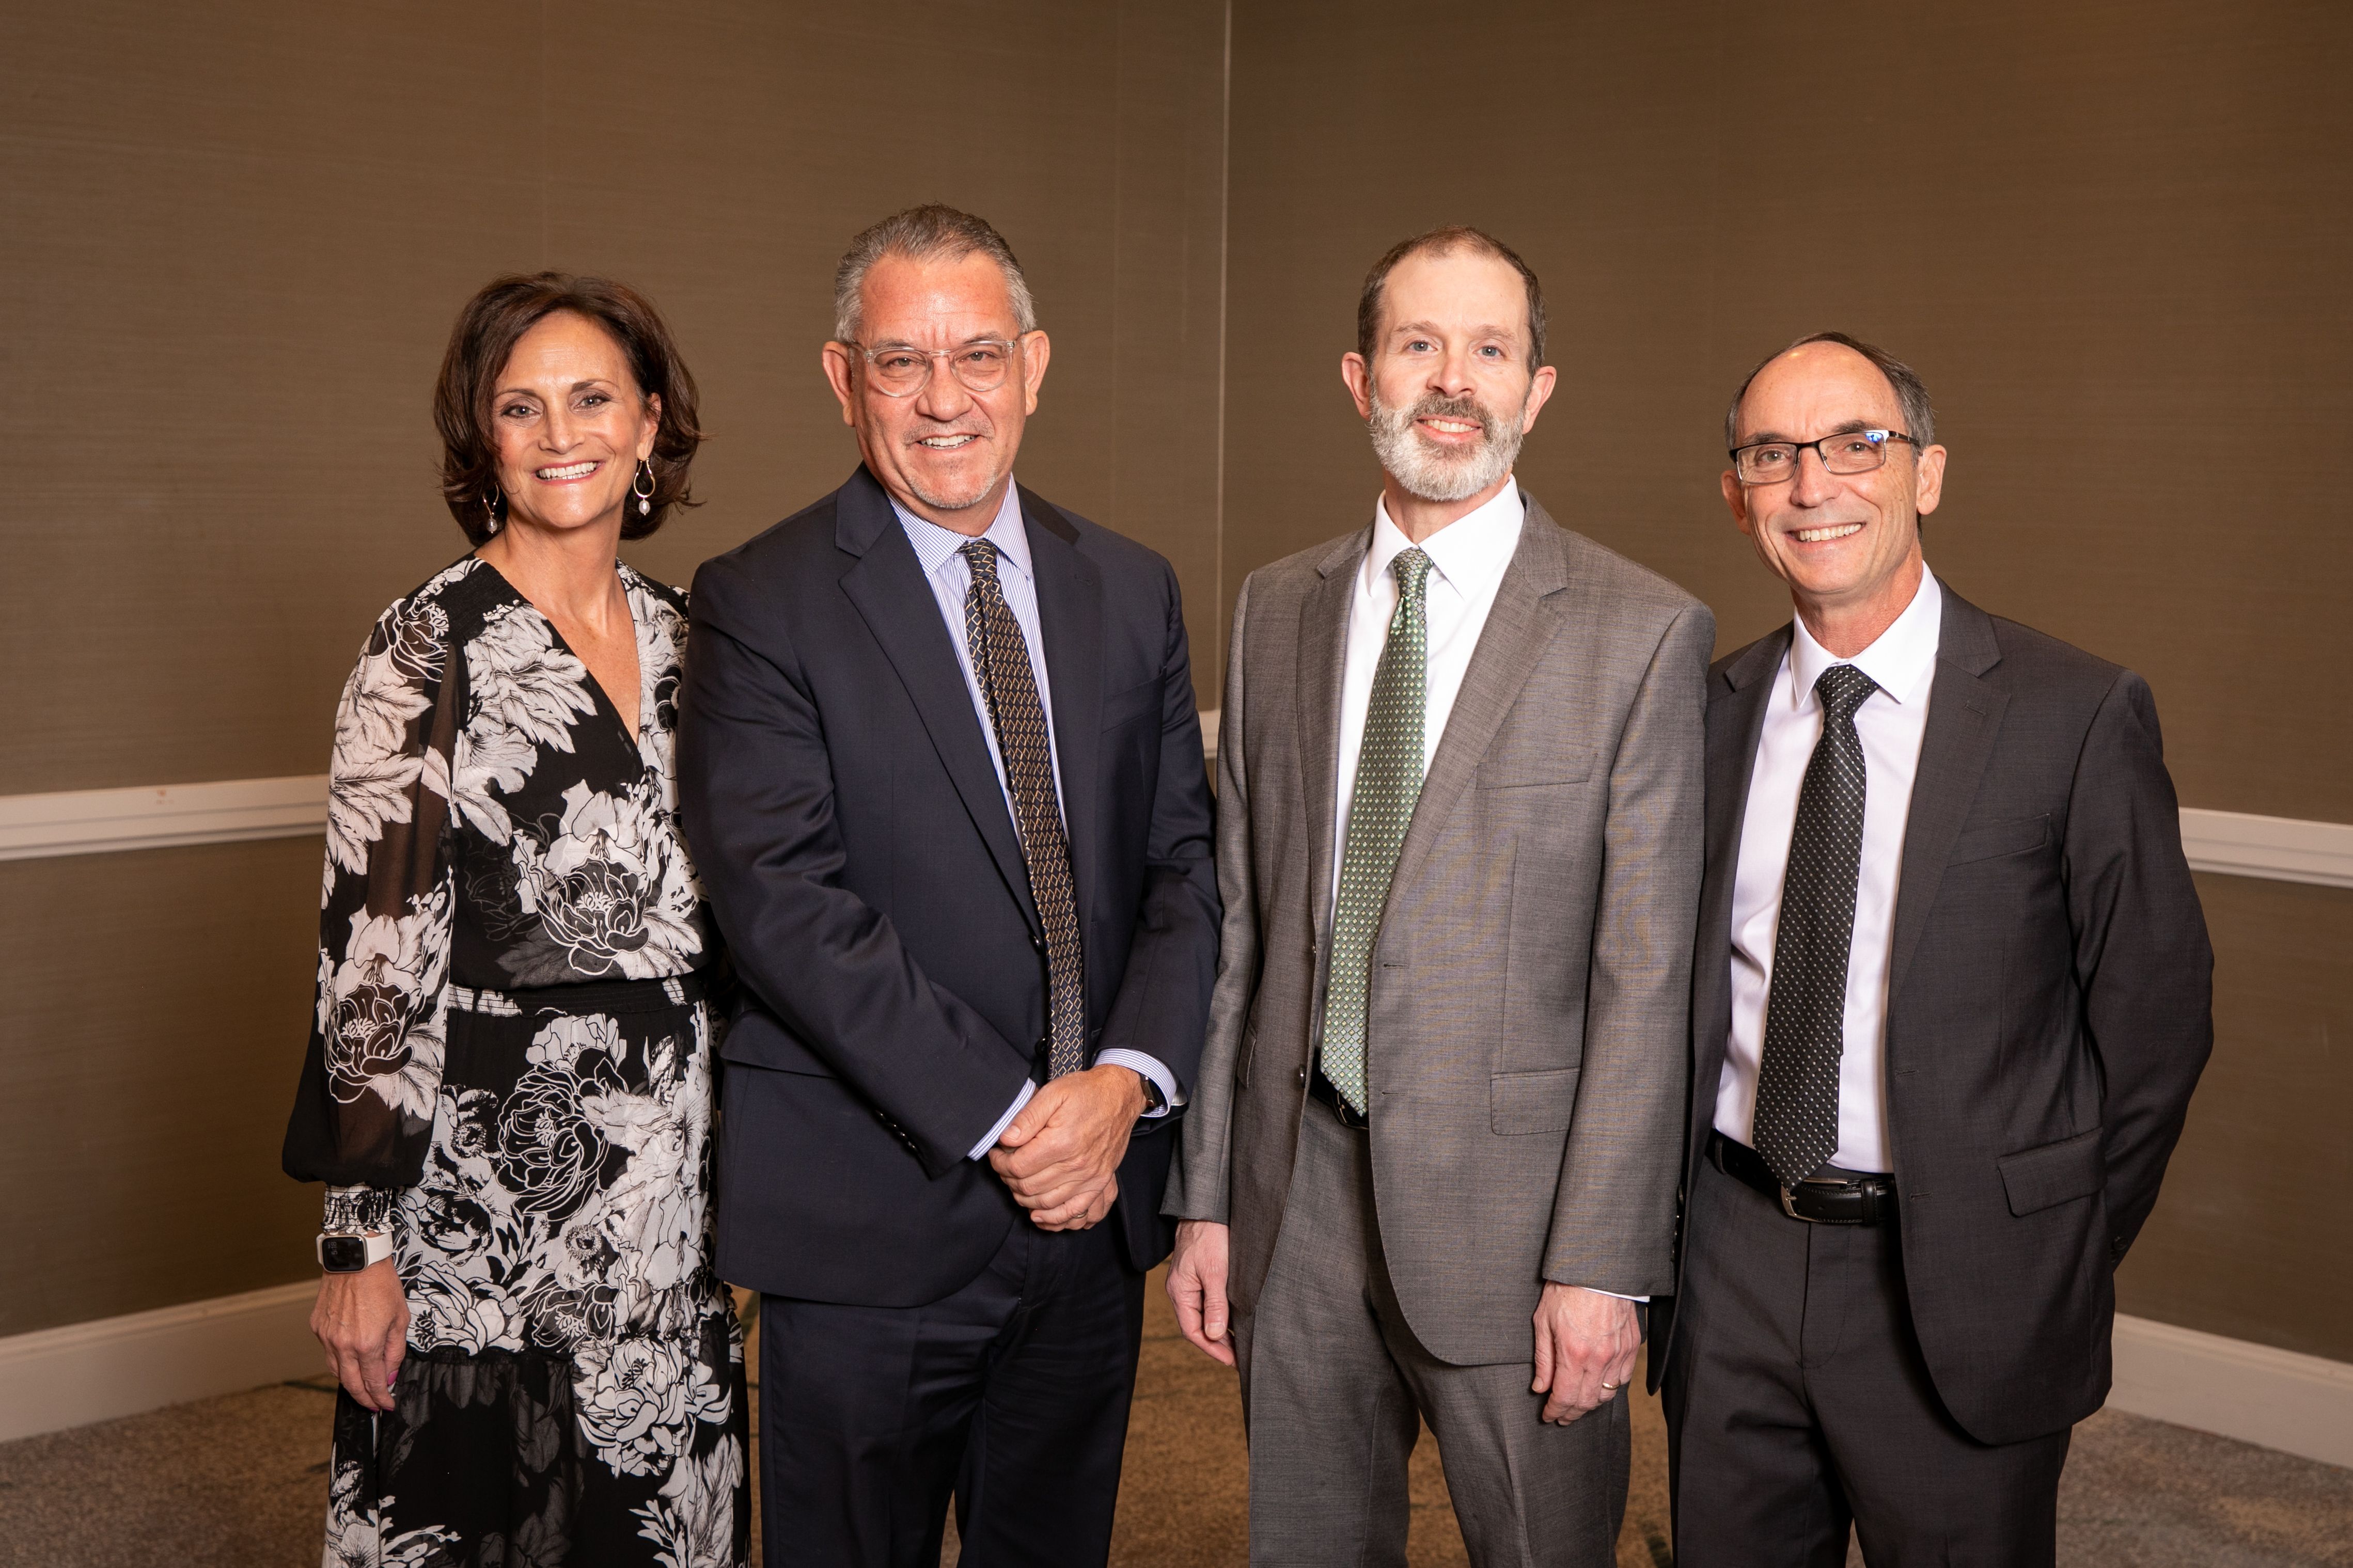 CJI 2022 Judicial Excellence Award Winners Judge Michelle Amico, Judge David Archuleta, Magistrate William McNulty, and Magistrate Kevin Kennedy